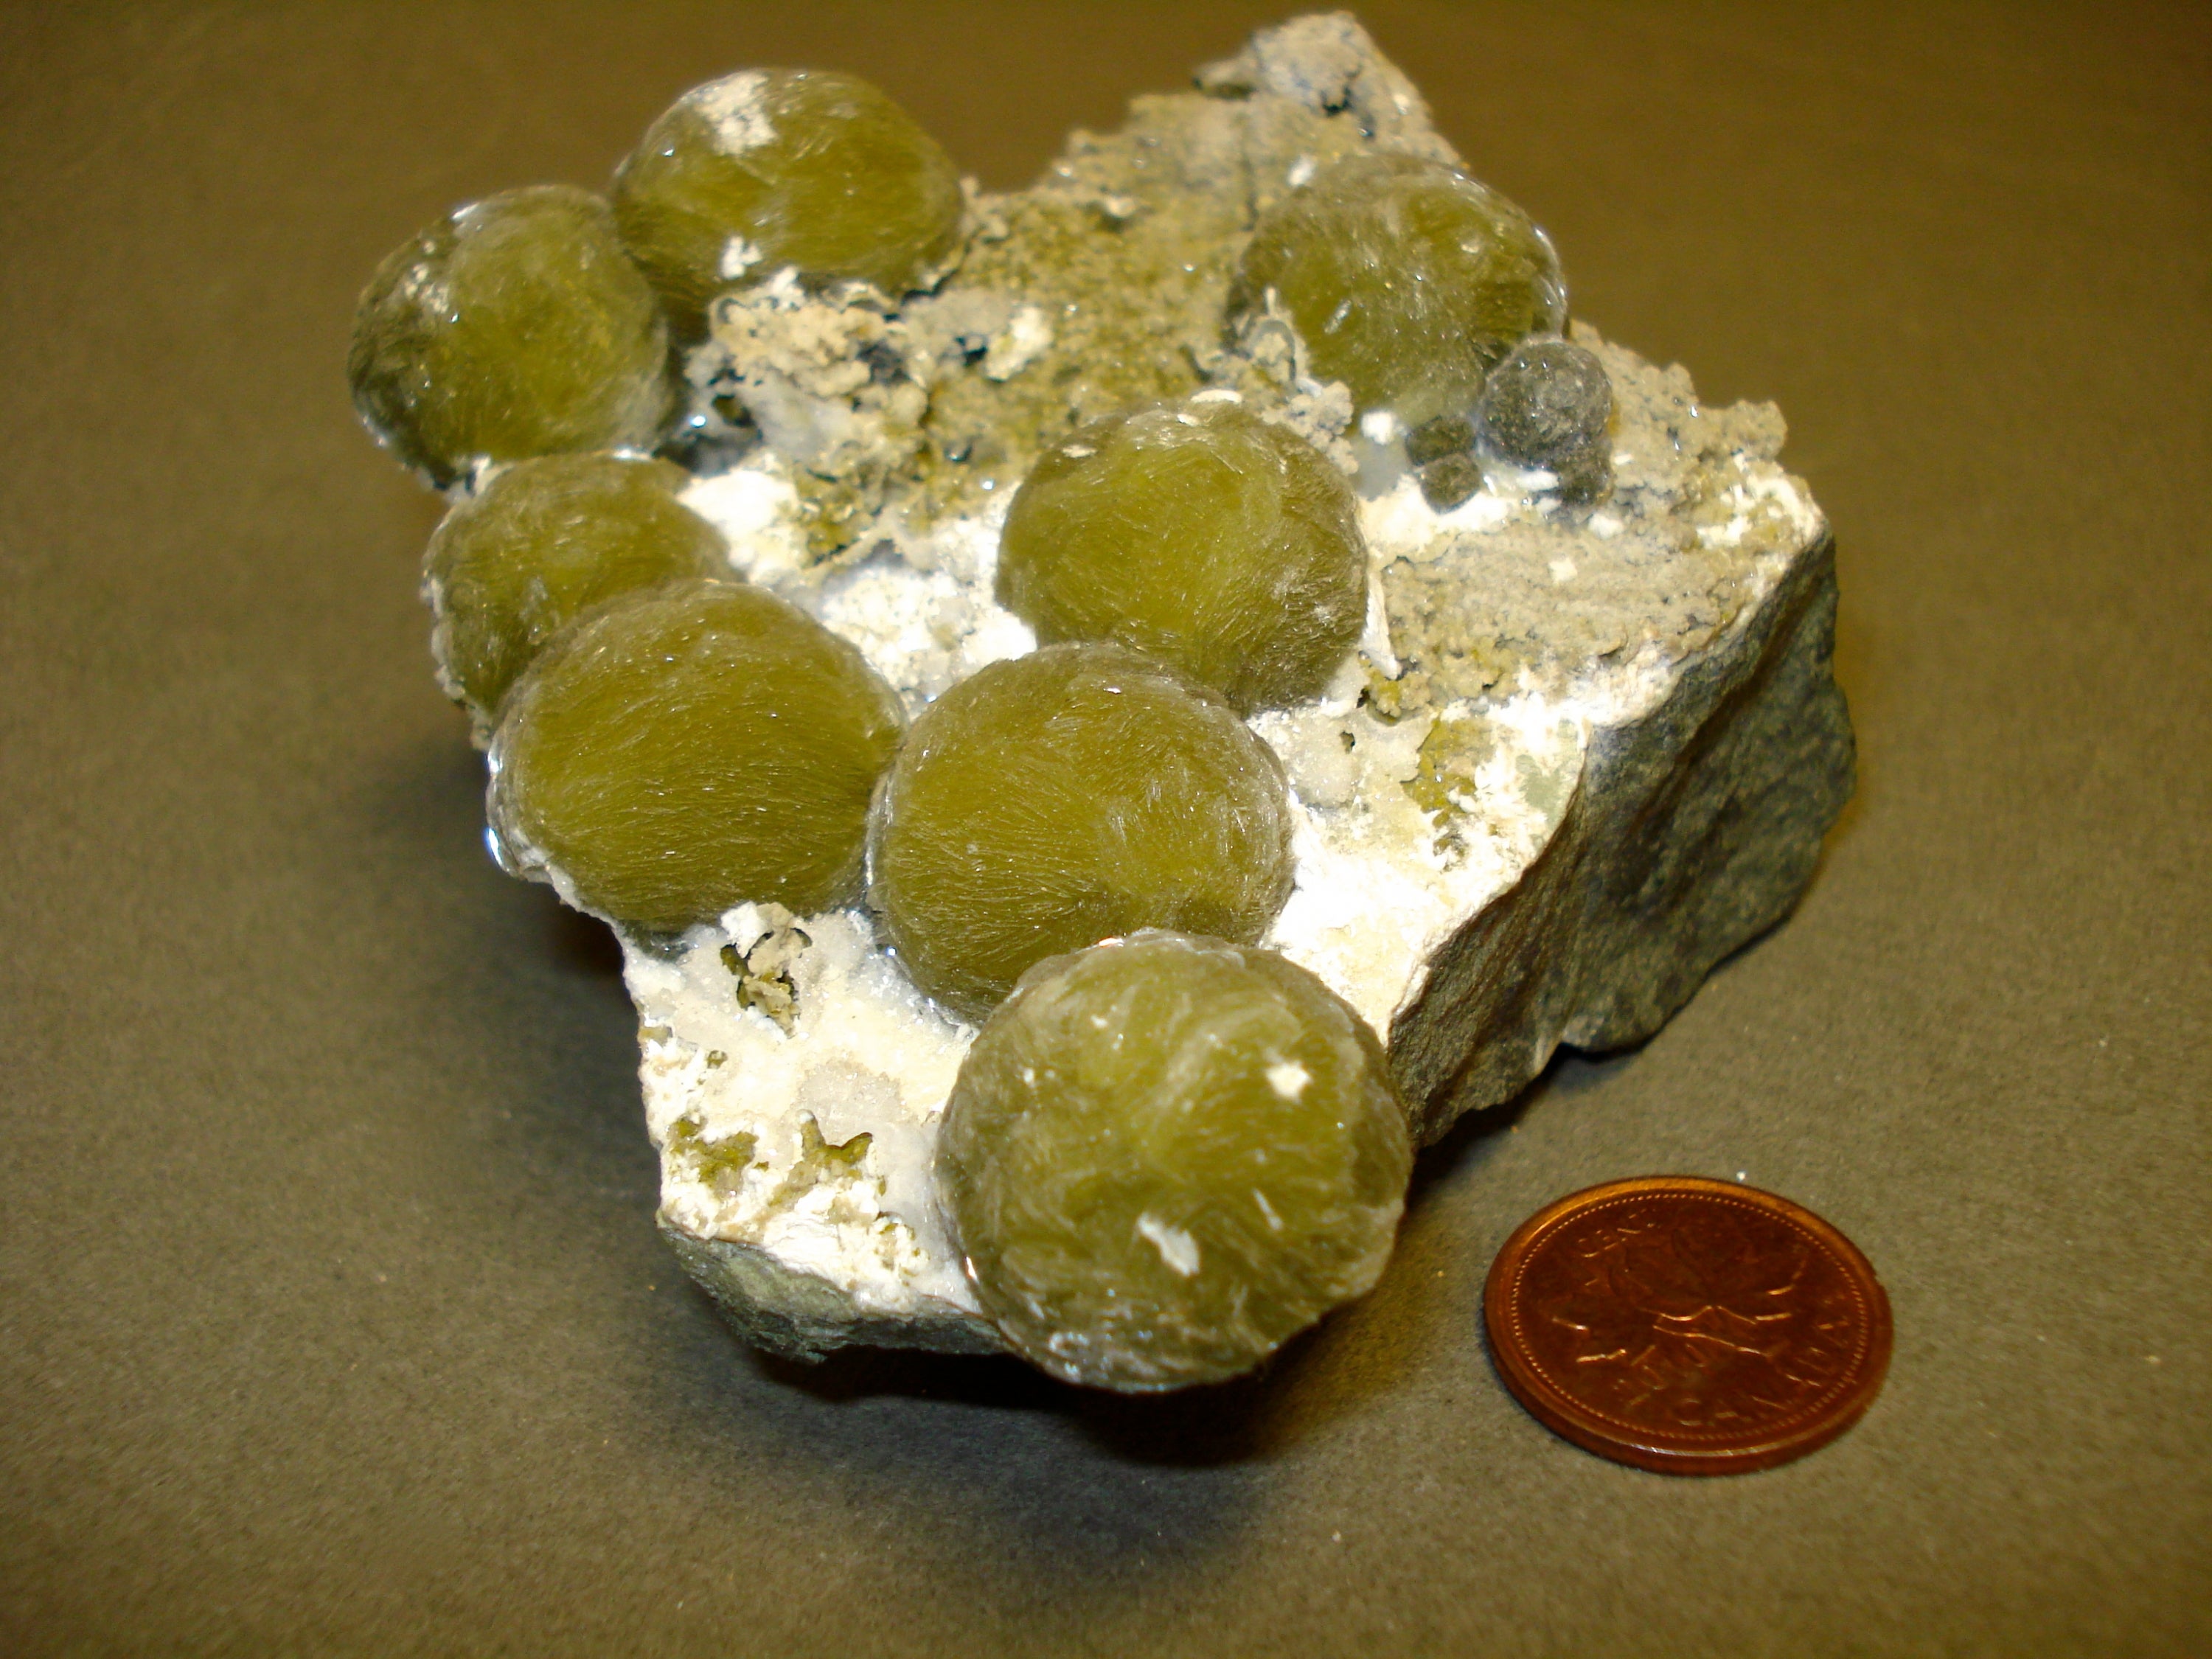 Gyrolite next to a penny for size comparison